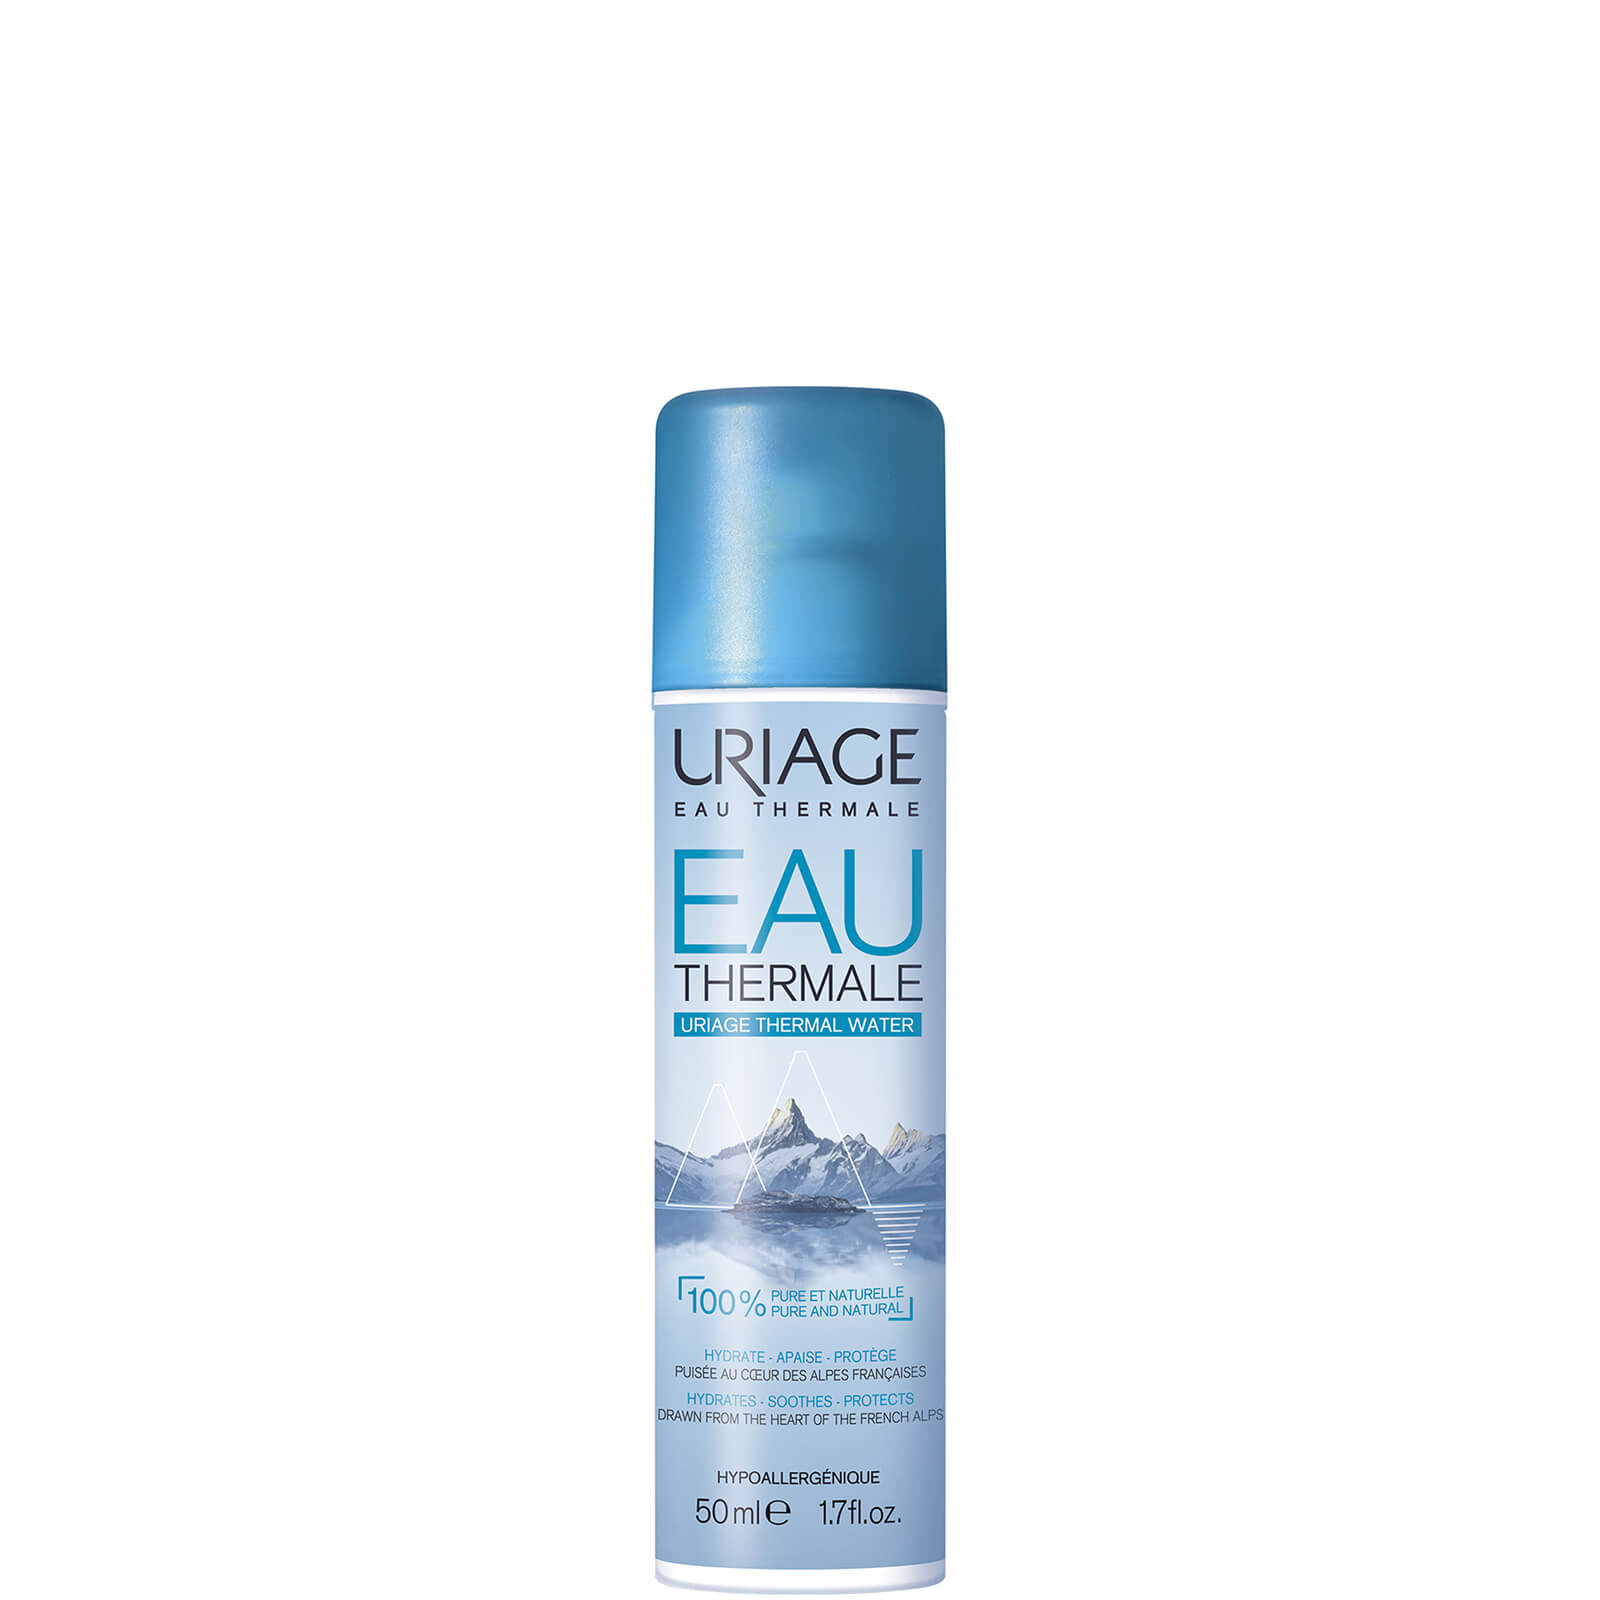 Photos - Cream / Lotion Uriage Eau Thermale Pure Thermal Water 50ml 65144228 